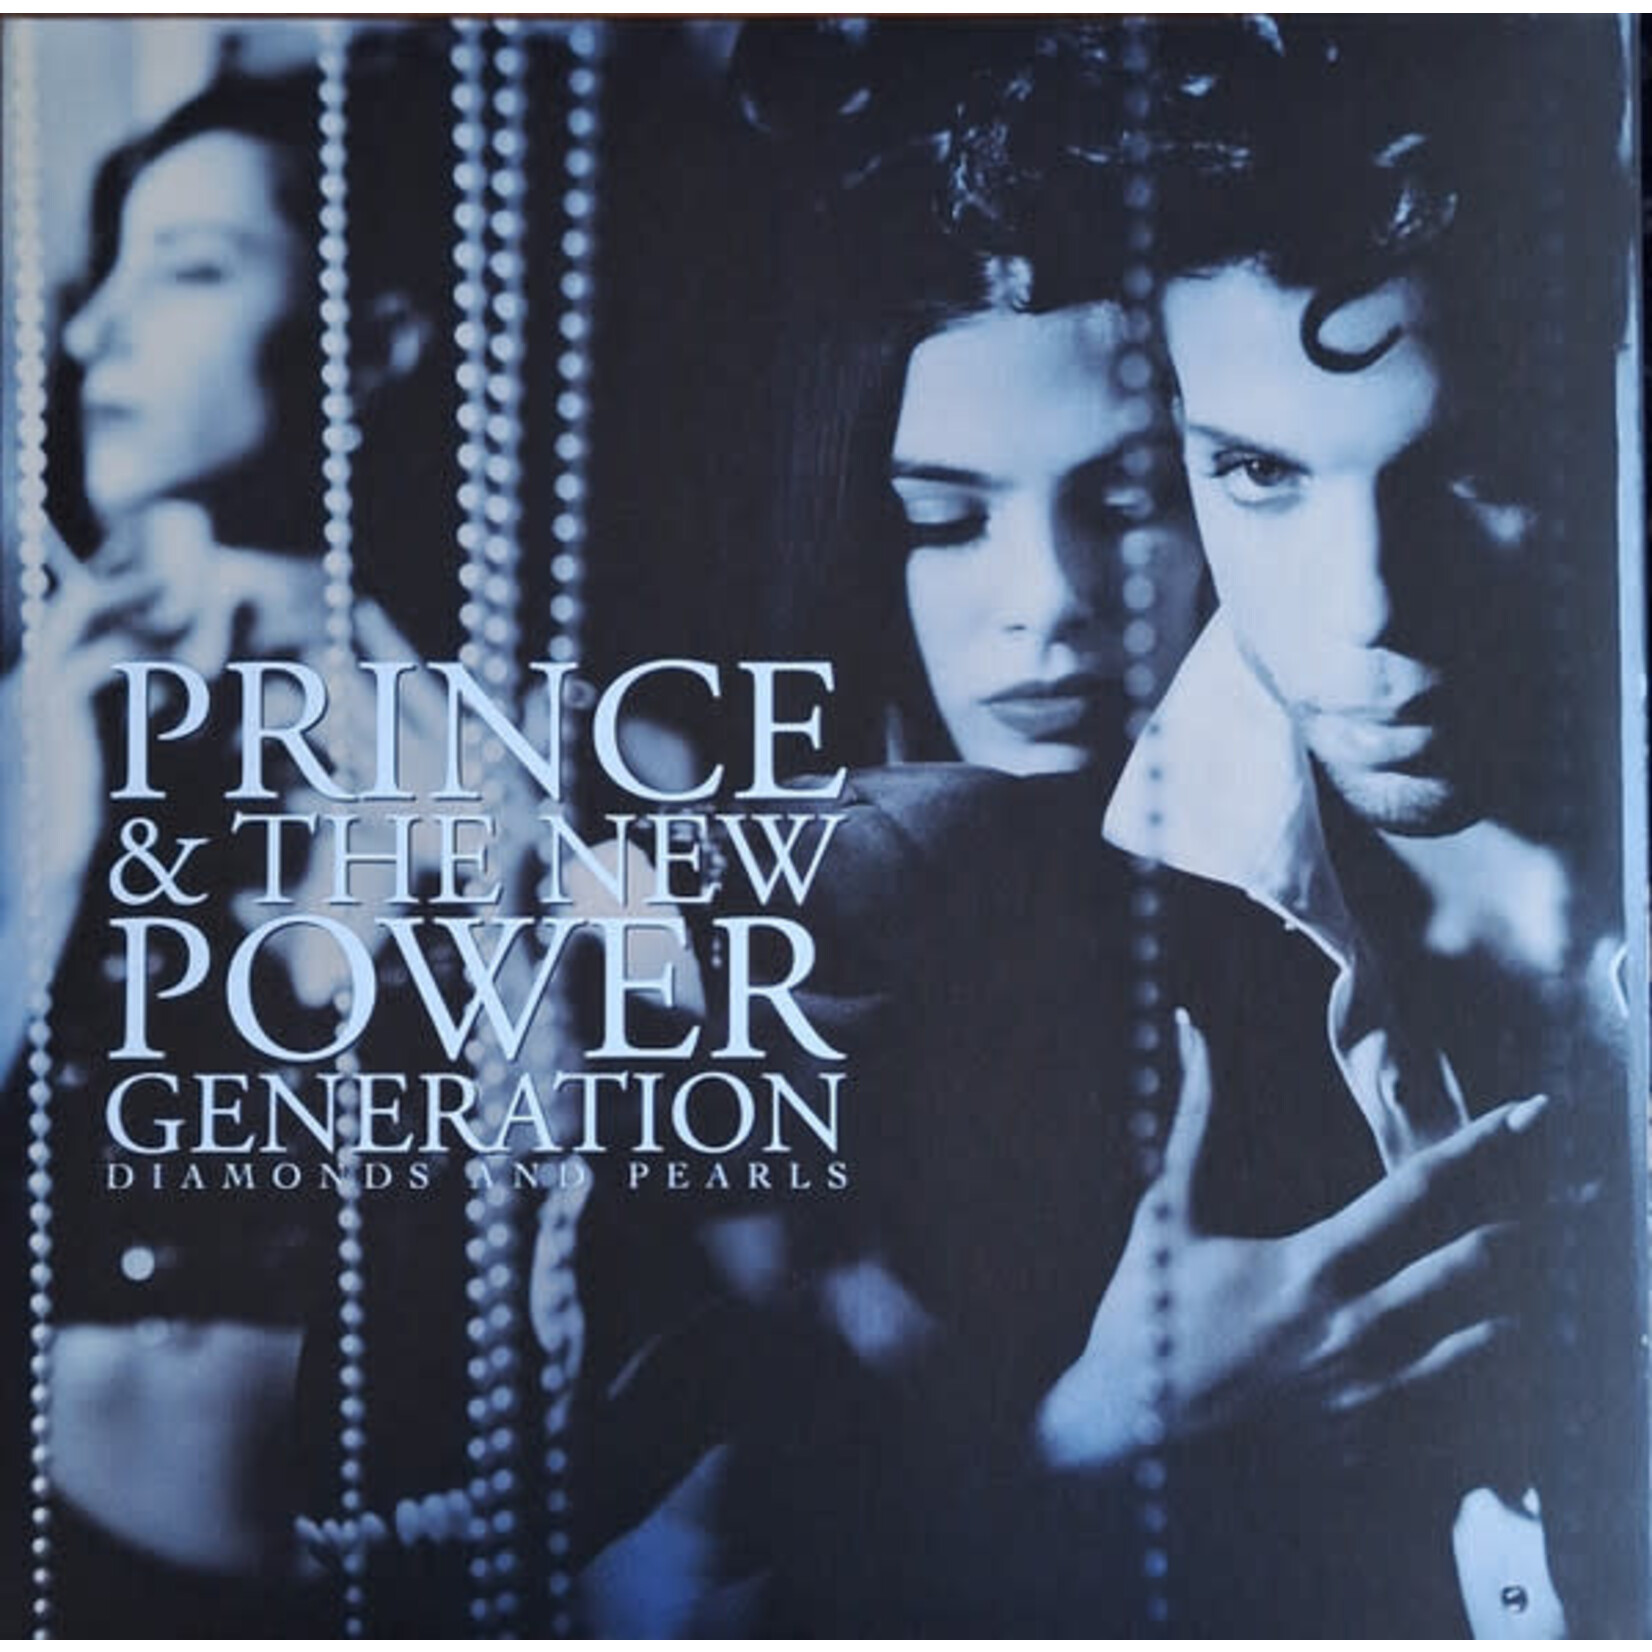 [New] Prince & The New Power Generation - Diamonds & Pearls (2LP, clear vinyl, 180g, remaster)